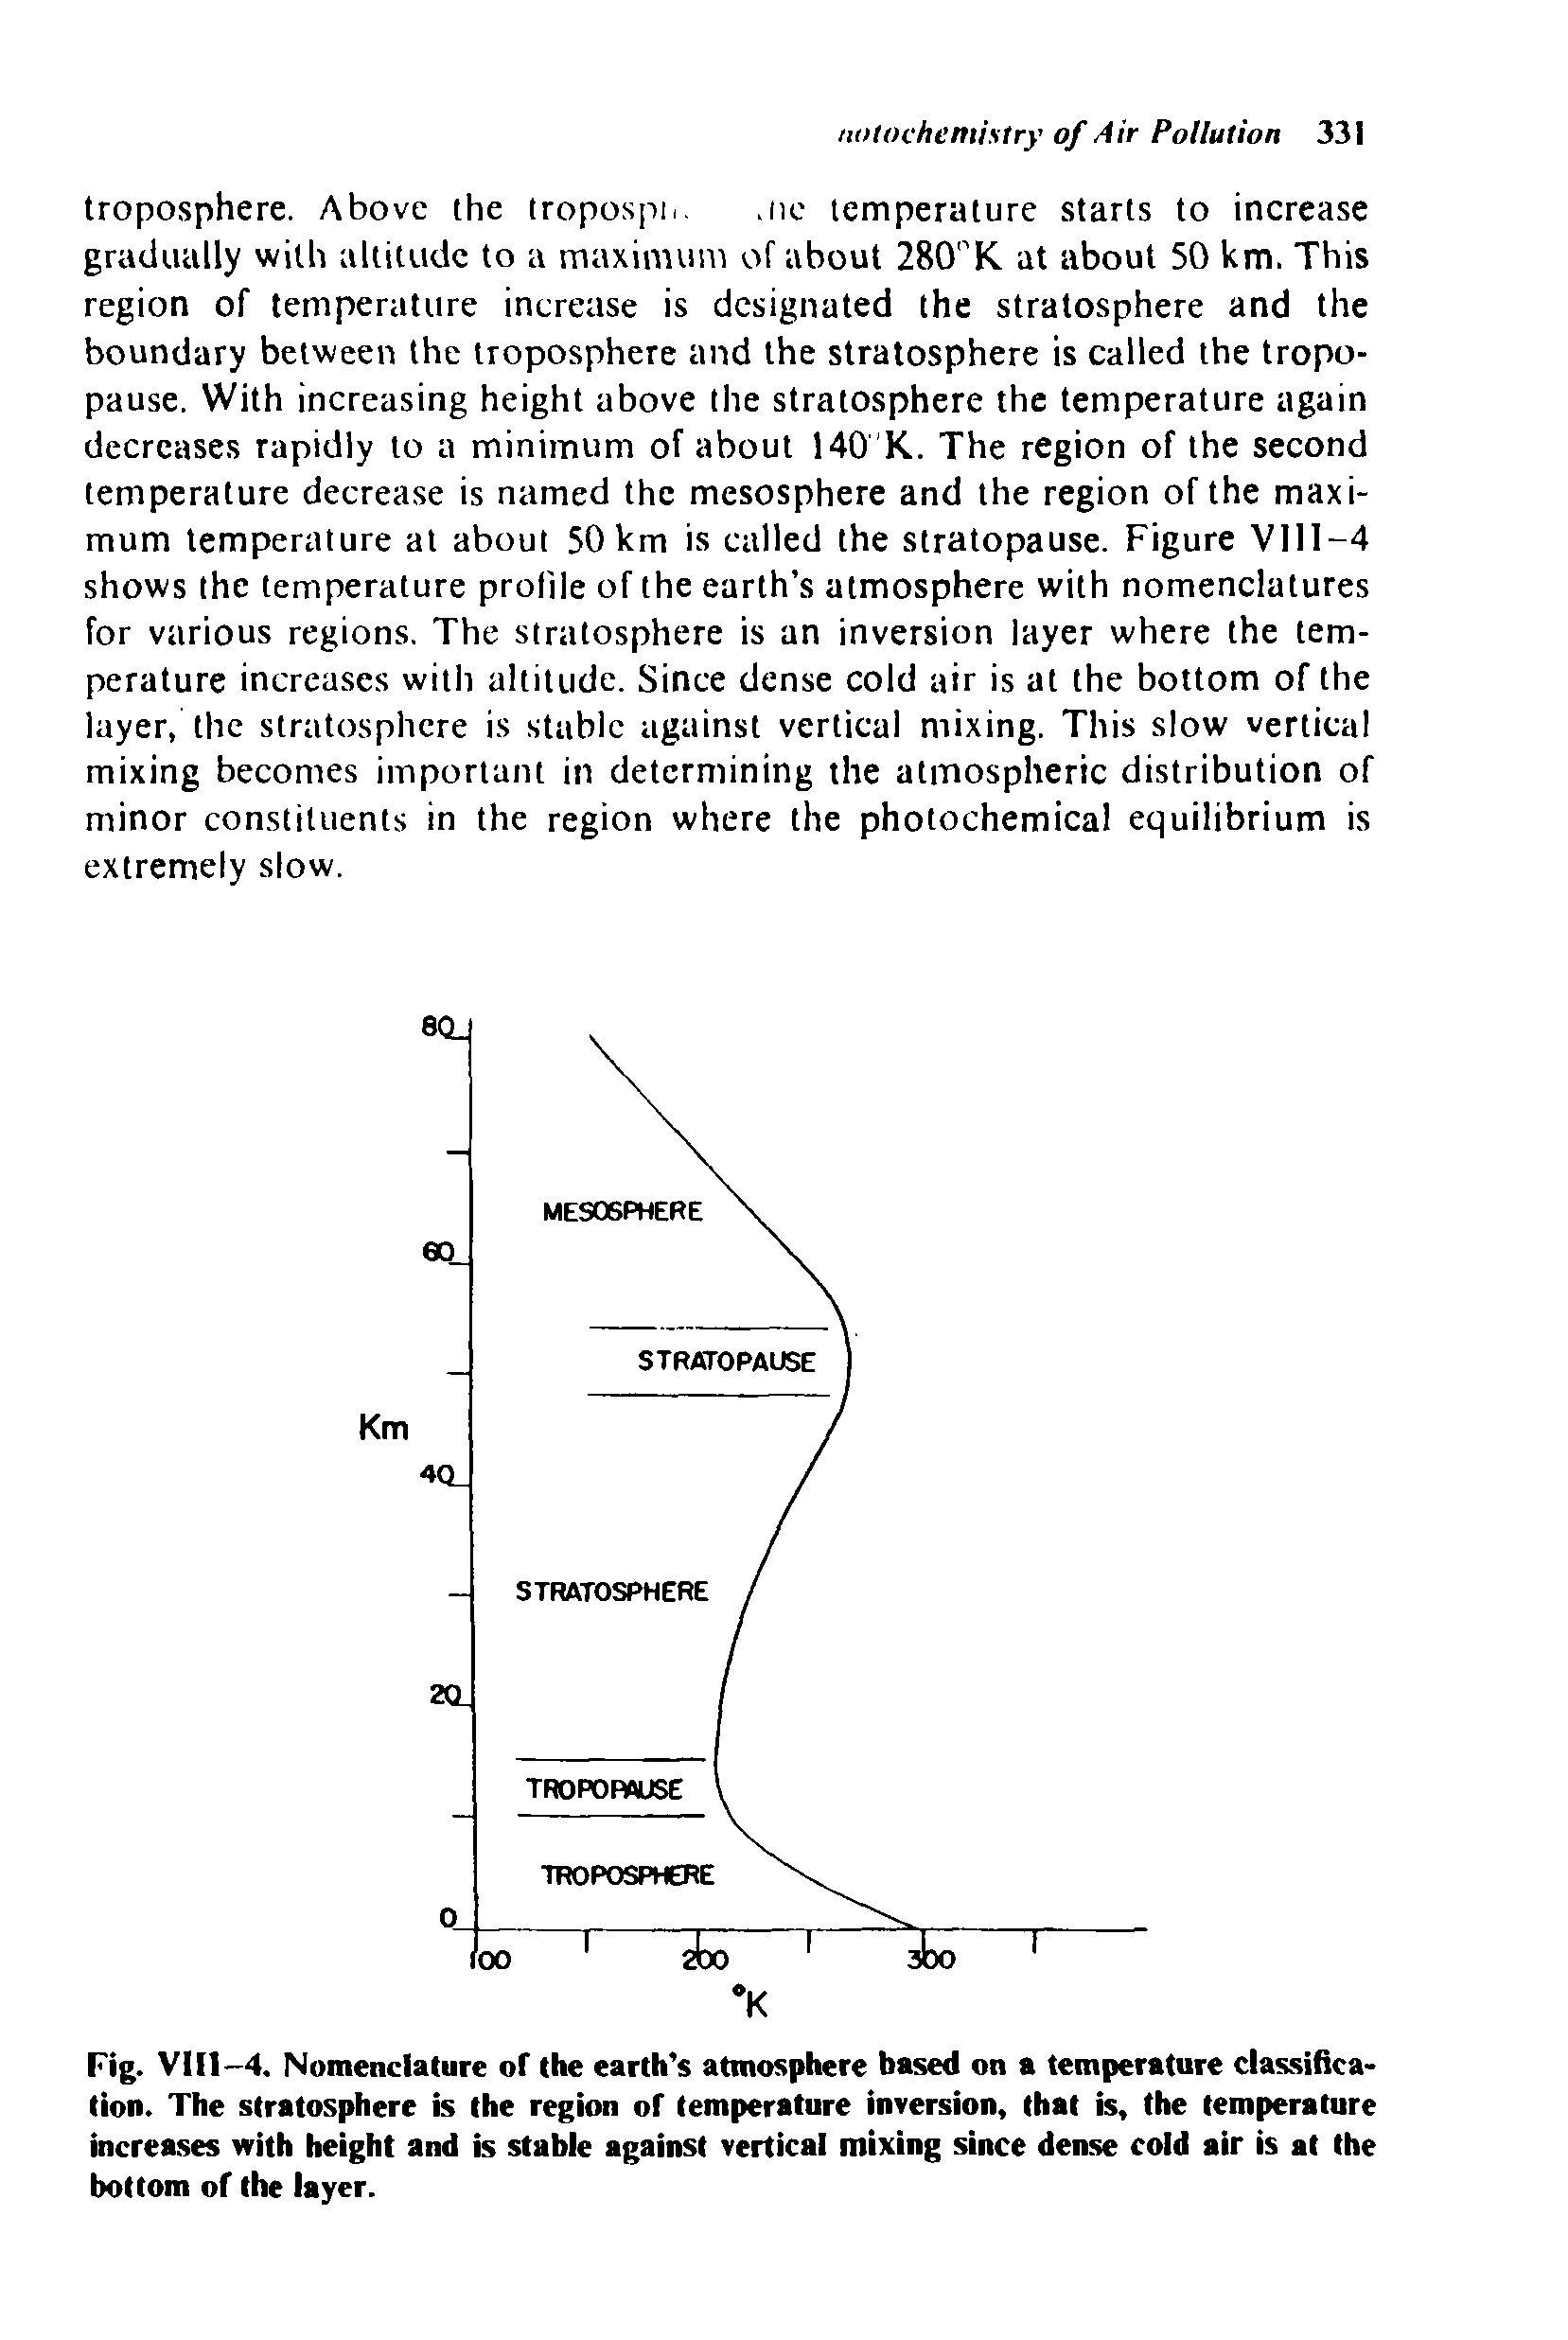 Fig. VIII-4. Nomenclature of the earth s atmosphere based on a temperature classification. The stratosphere is the region of temperature inversion, that is, the temperature increases with height and is stable against vertical mixing since dense cold air is at the bottom of the layer.